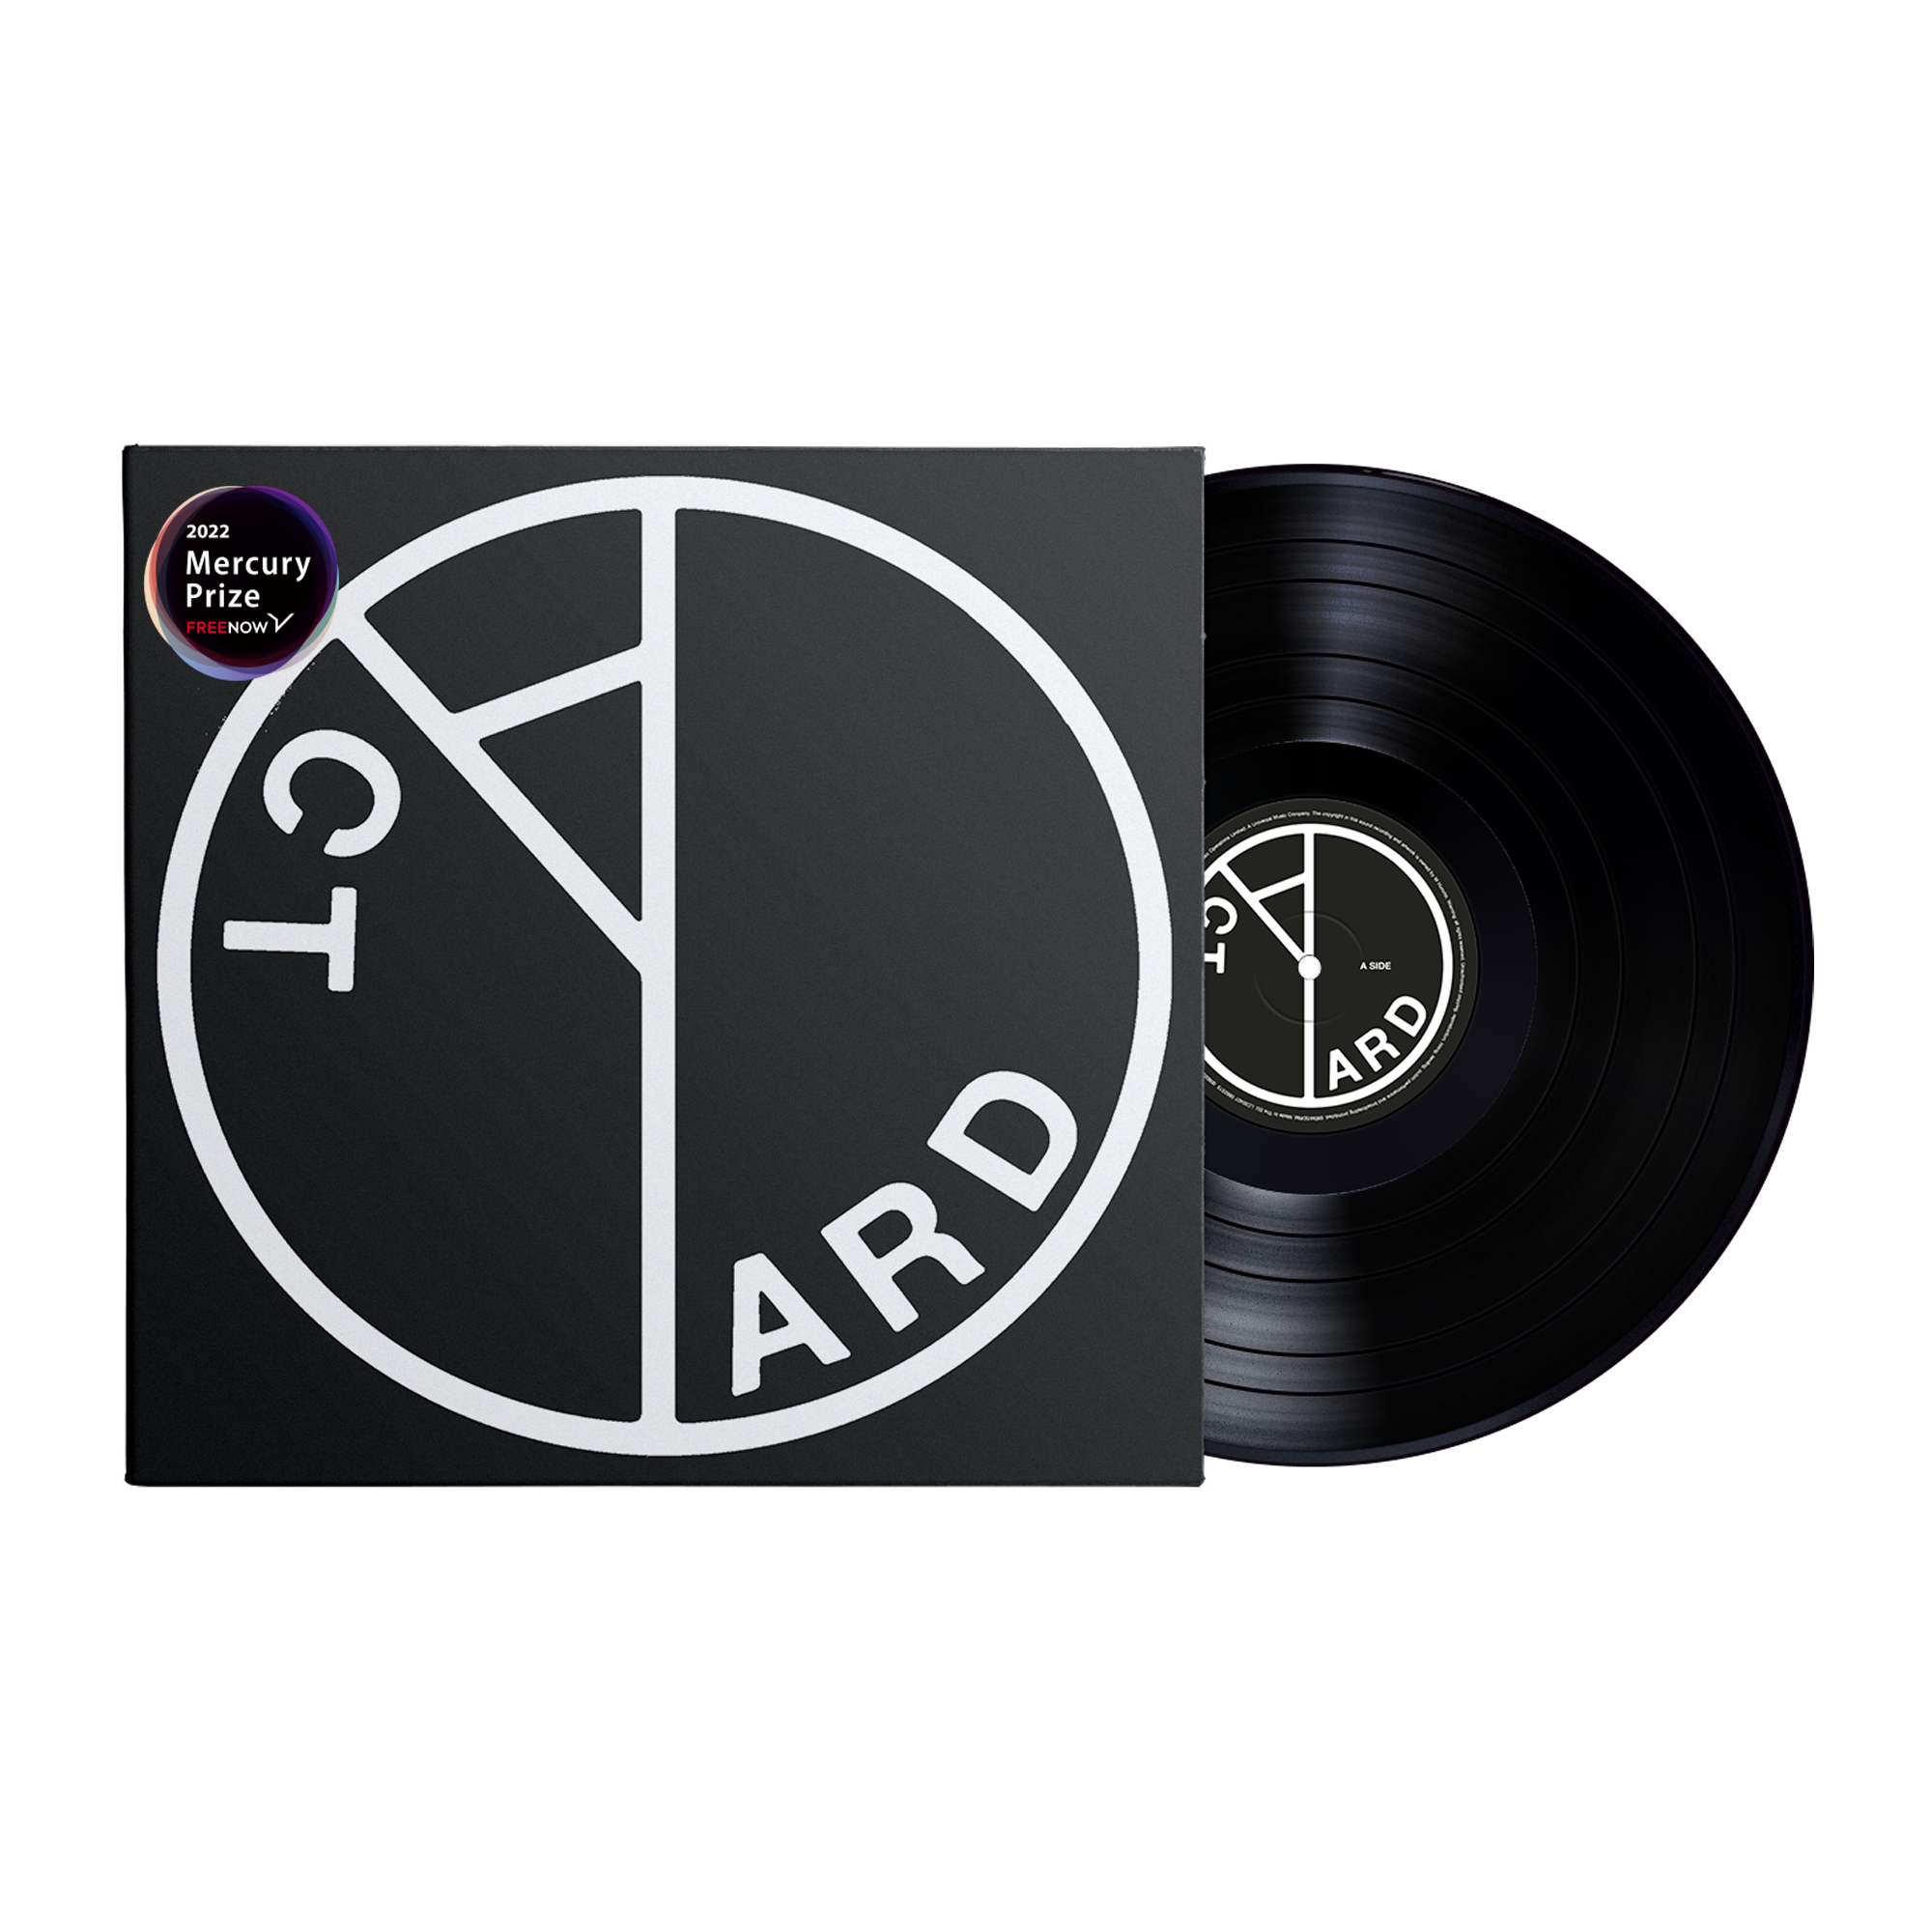 Yard Act - The Overload: Black LP